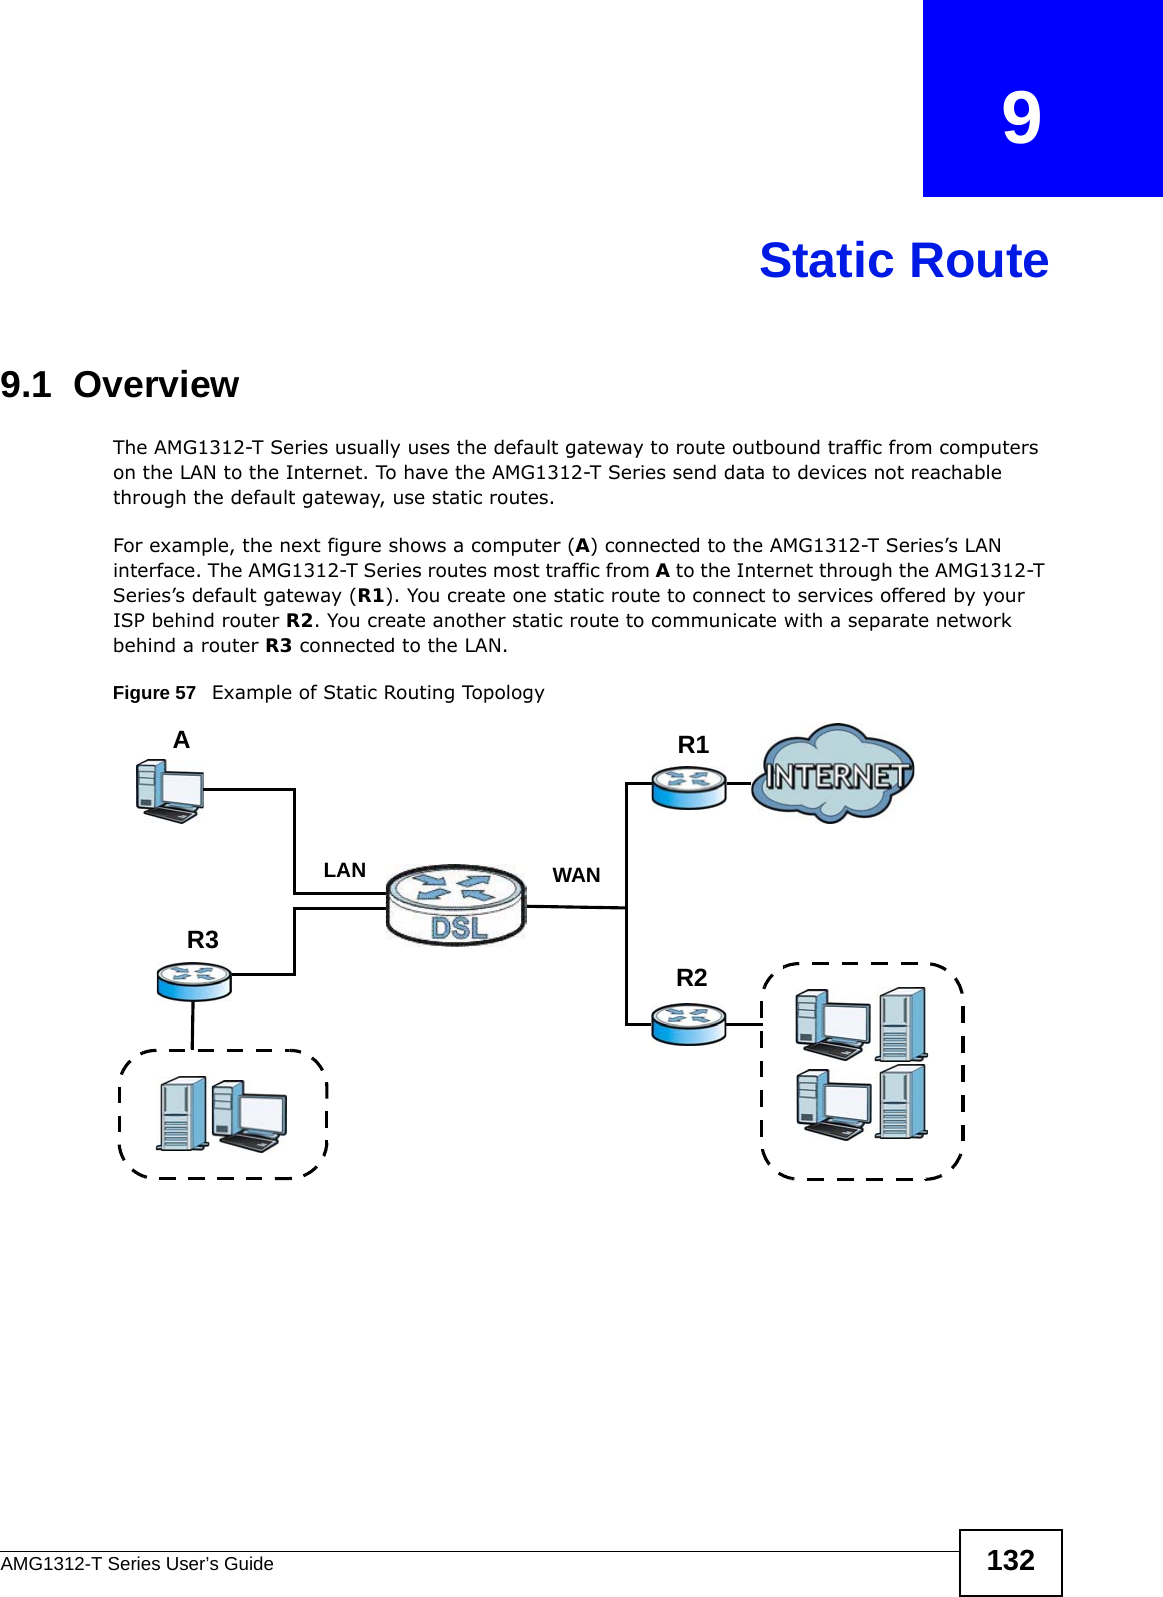 AMG1312-T Series User’s Guide 132CHAPTER   9Static Route9.1  Overview The AMG1312-T Series usually uses the default gateway to route outbound traffic from computers on the LAN to the Internet. To have the AMG1312-T Series send data to devices not reachable through the default gateway, use static routes.For example, the next figure shows a computer (A) connected to the AMG1312-T Series’s LAN interface. The AMG1312-T Series routes most traffic from A to the Internet through the AMG1312-T Series’s default gateway (R1). You create one static route to connect to services offered by your ISP behind router R2. You create another static route to communicate with a separate network behind a router R3 connected to the LAN.   Figure 57   Example of Static Routing TopologyWANR1R2AR3LAN